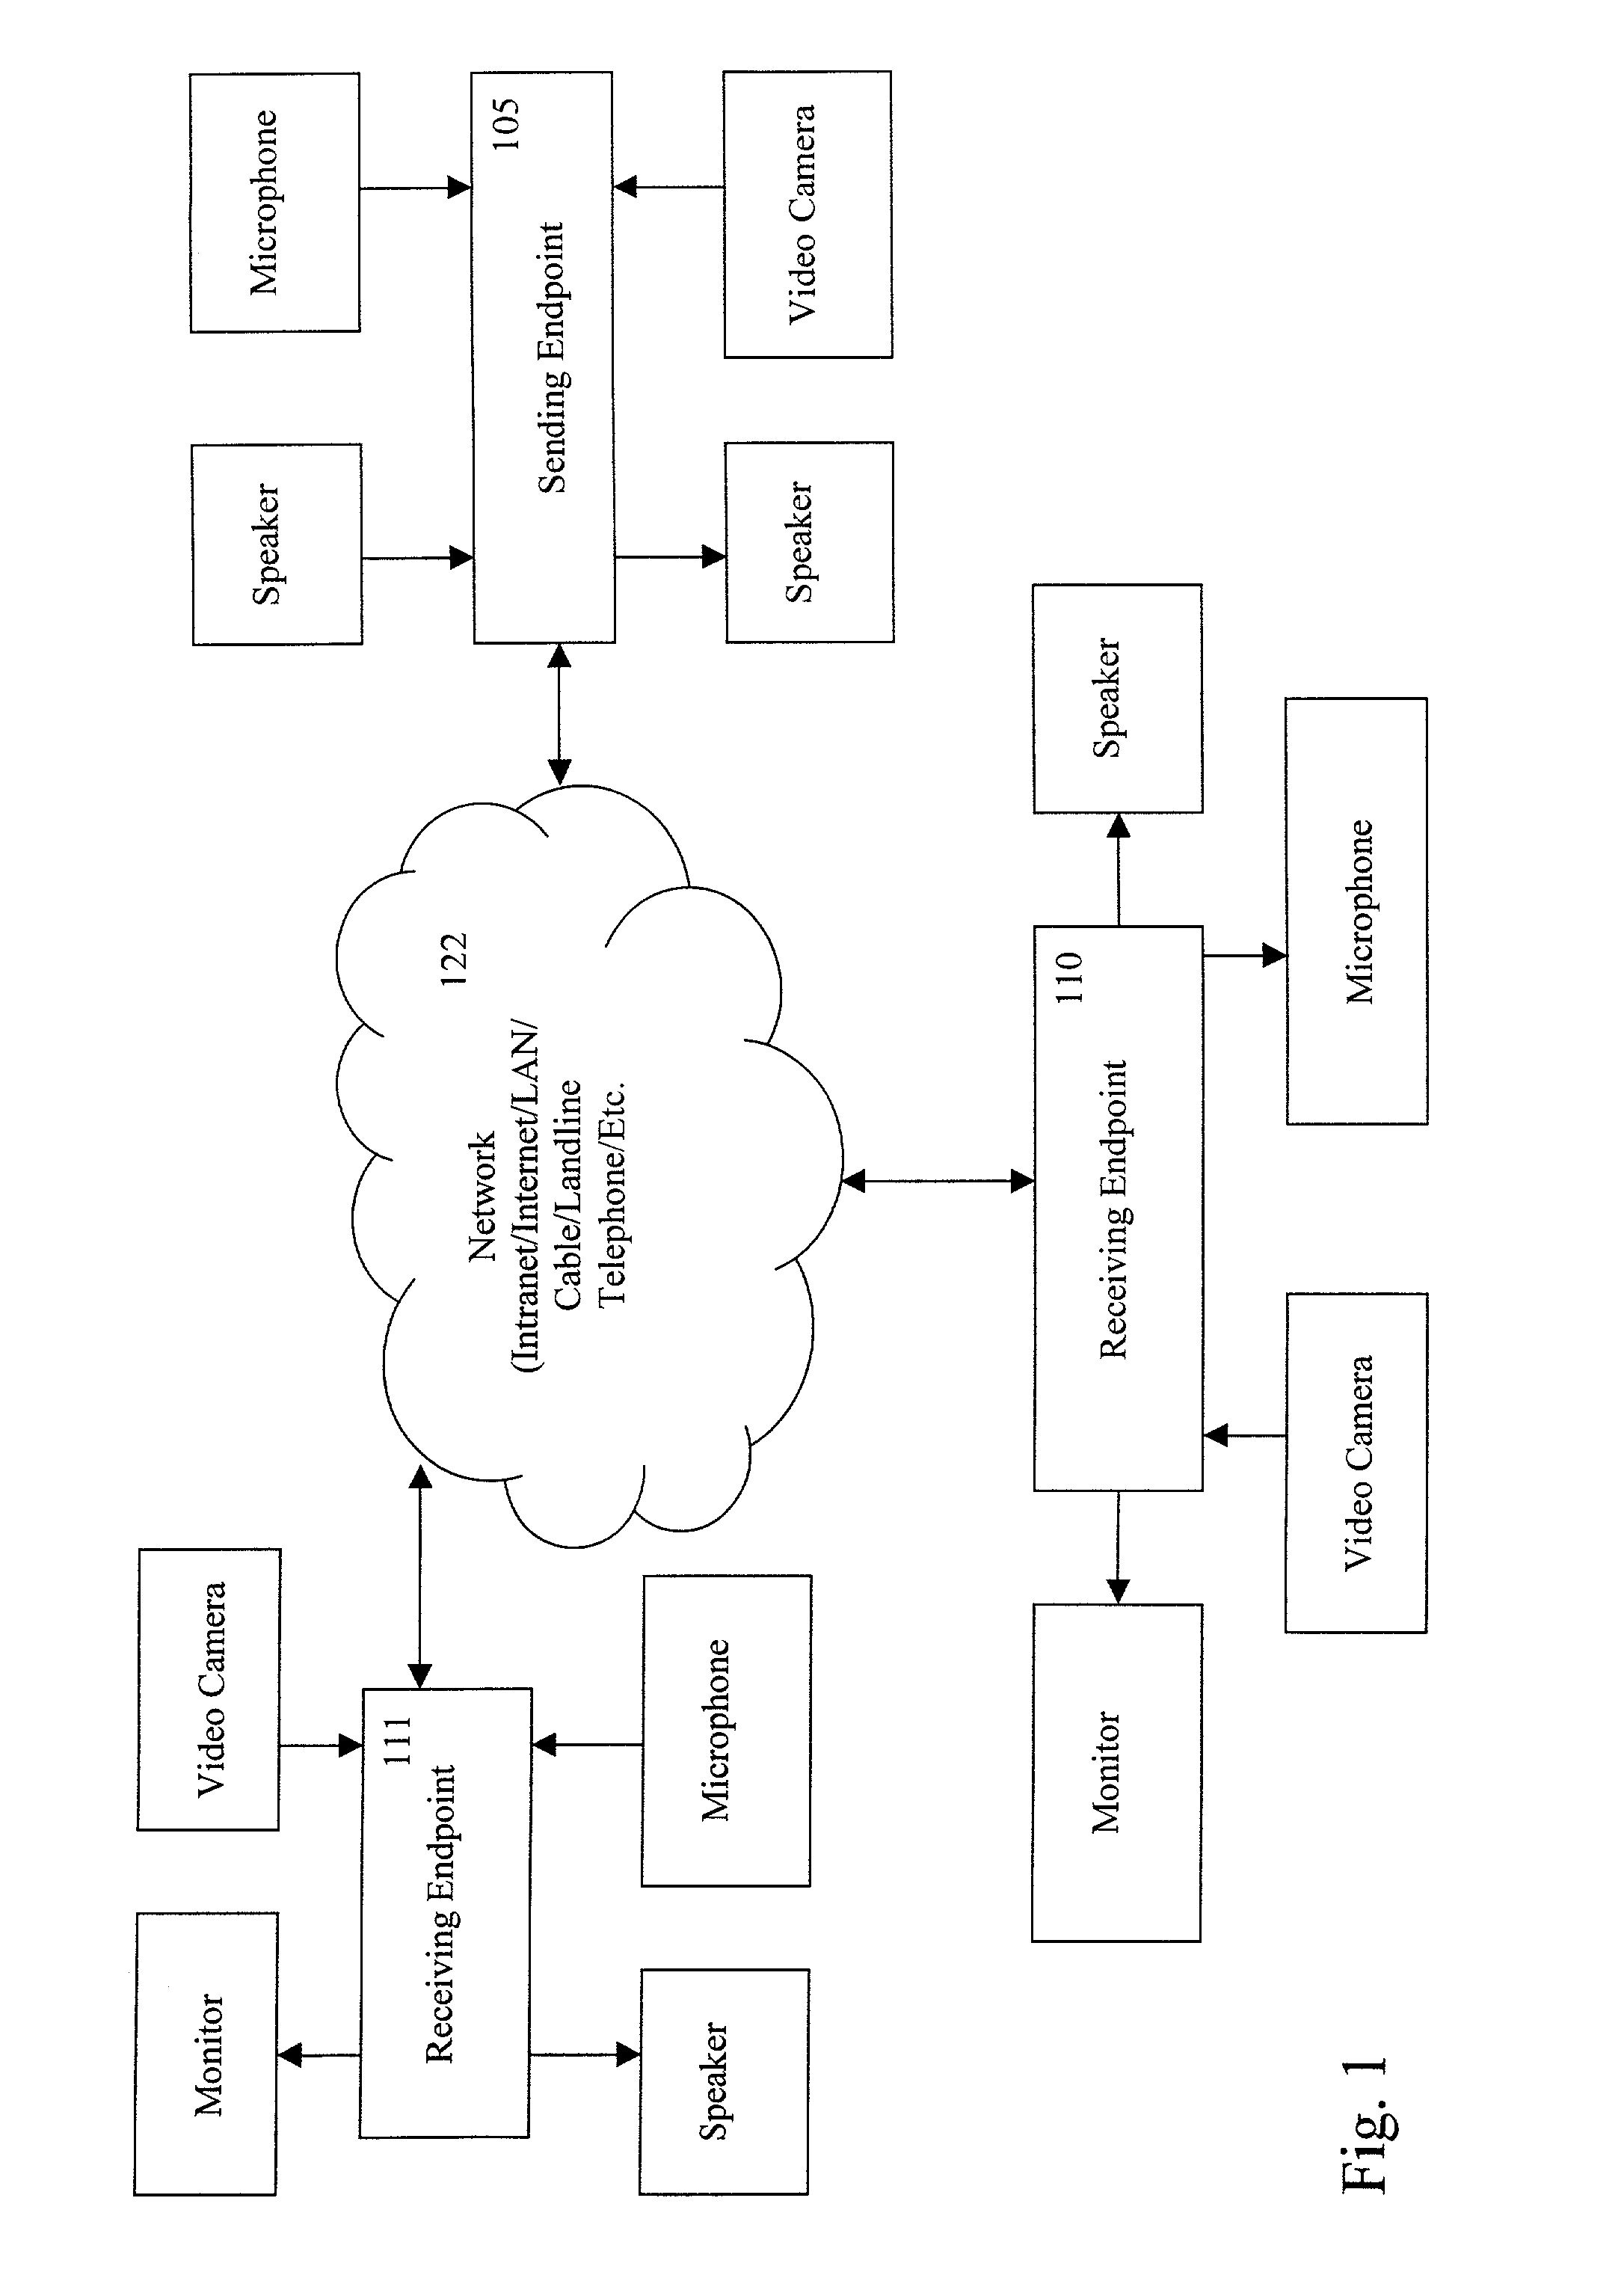 Method and system for dynamically adjusting video bit rates